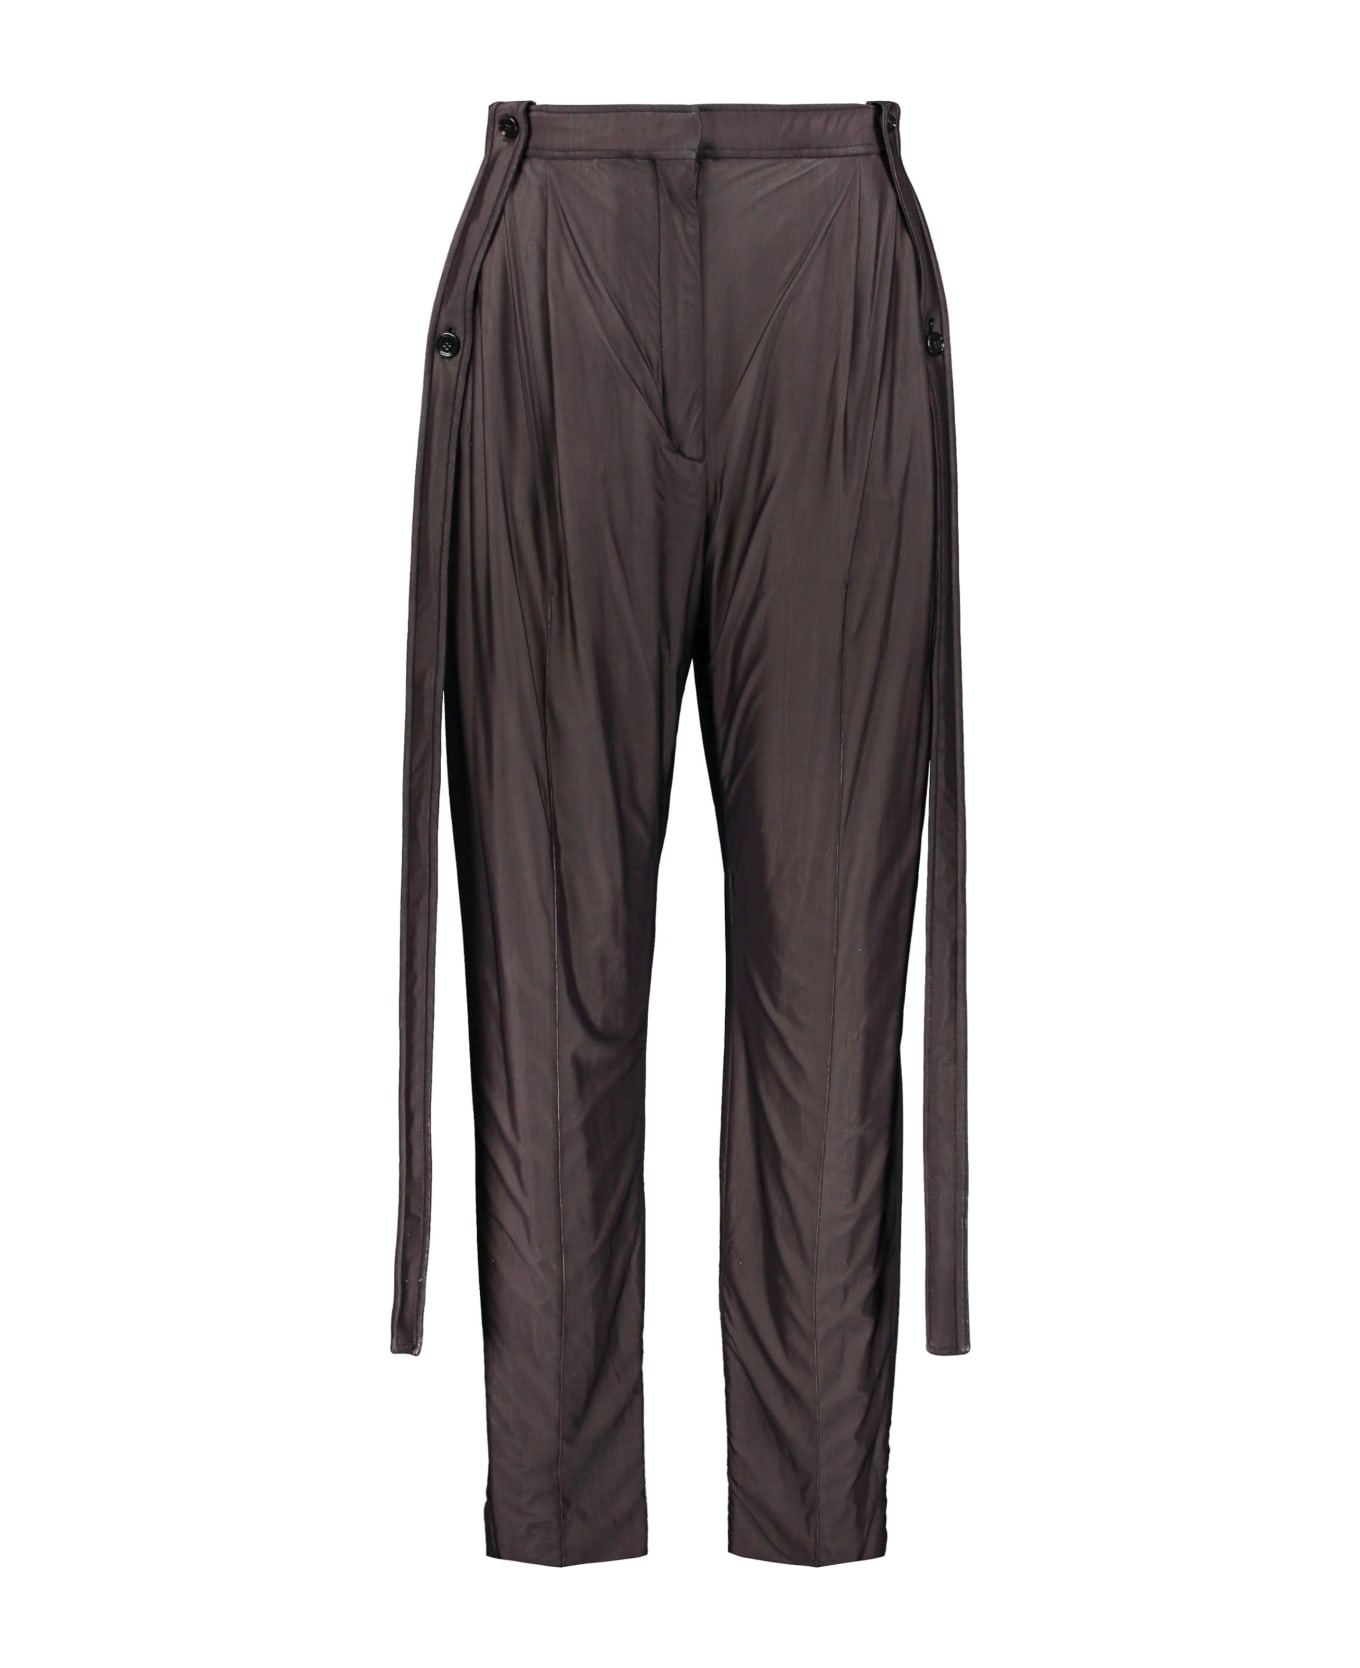 Burberry Technical Fabric Pants - brown